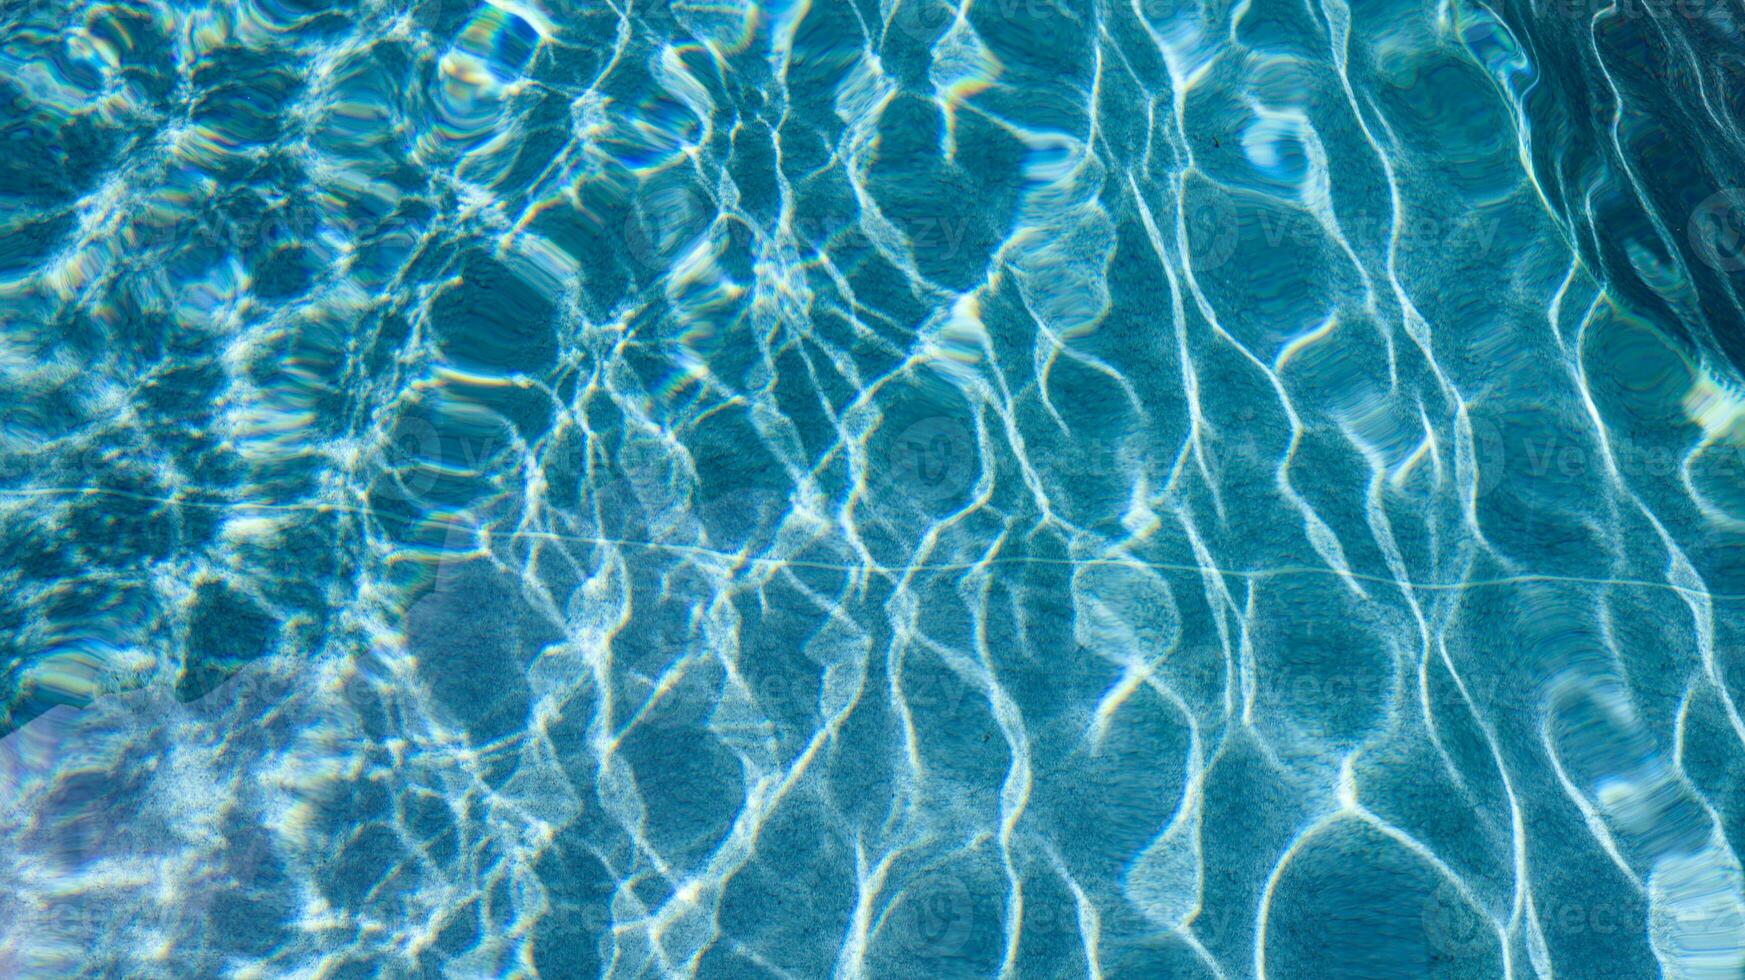 Abstract pool water.  Swimming pool bottom caustics ripple and flow with waves background surface of blue swimming pool photo